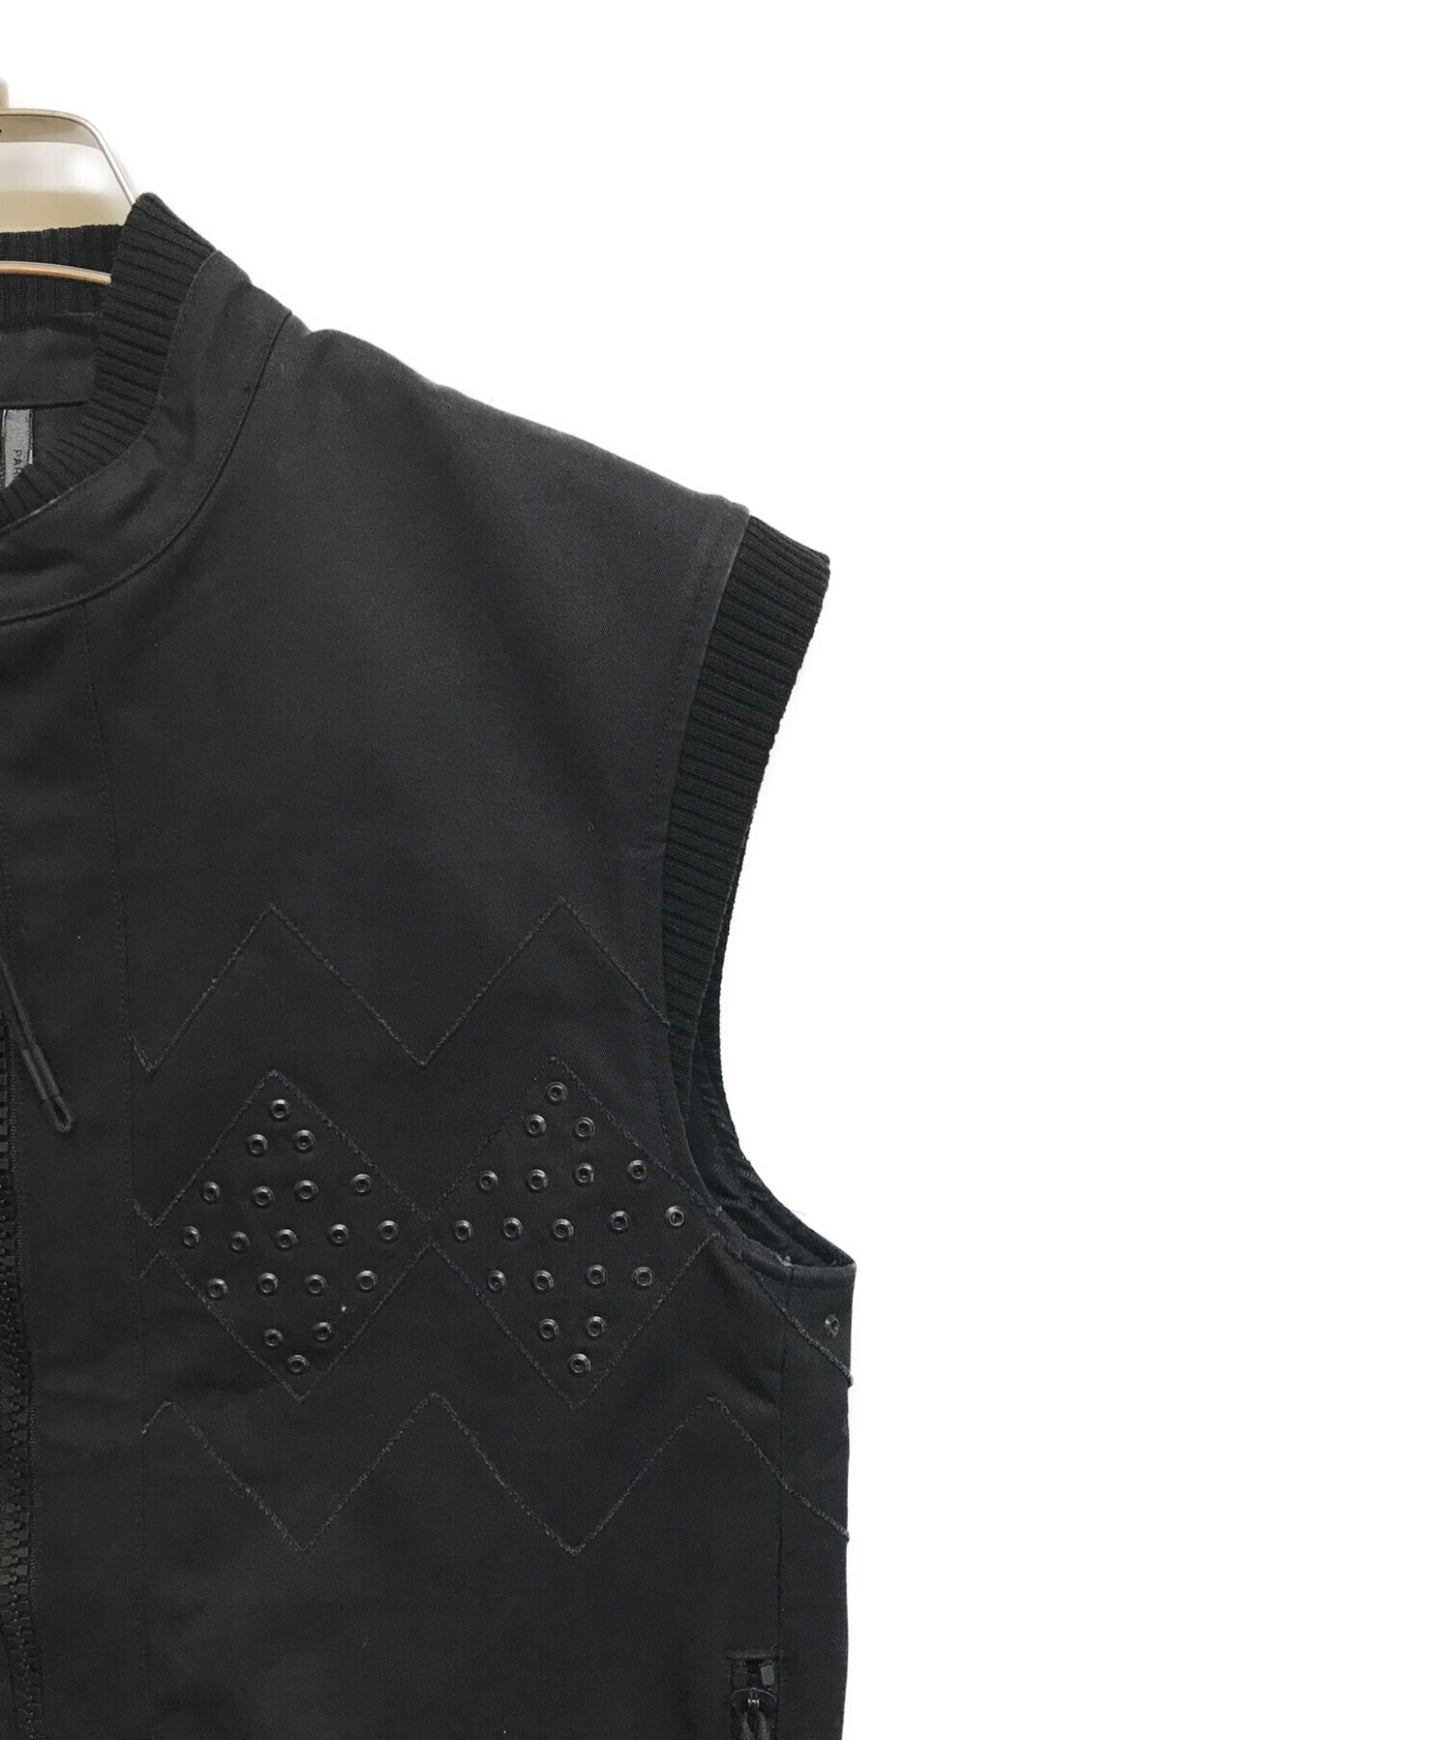 [Pre-owned] Dior Homme by Hedi Slimane Military blouson vest 4EH1040561